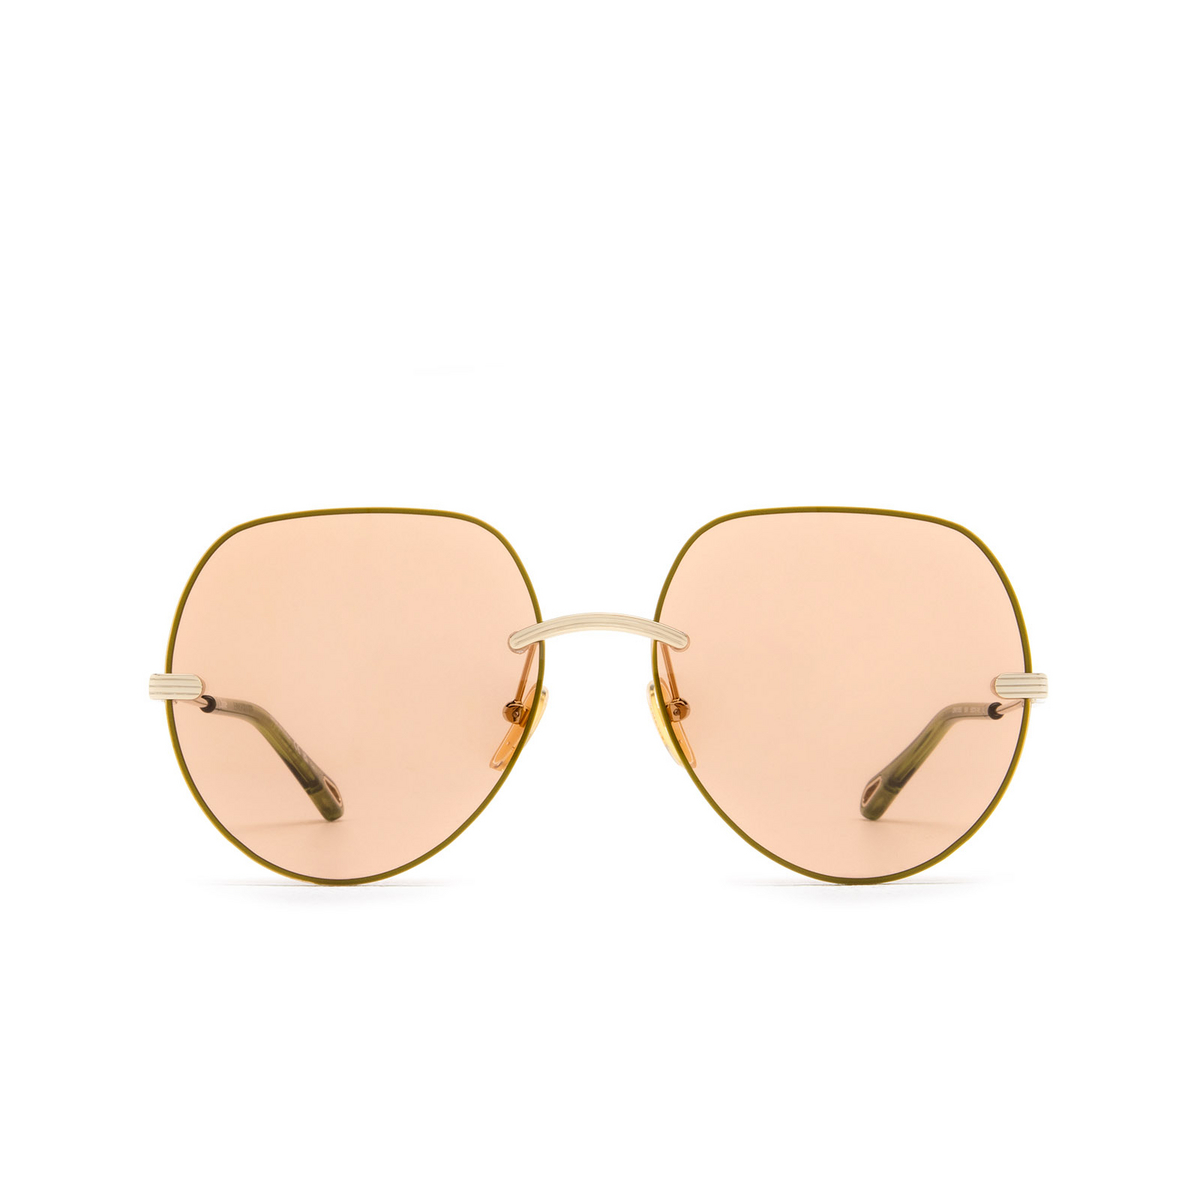 Chloé Benjamine round Sunglasses 004 Gold - front view